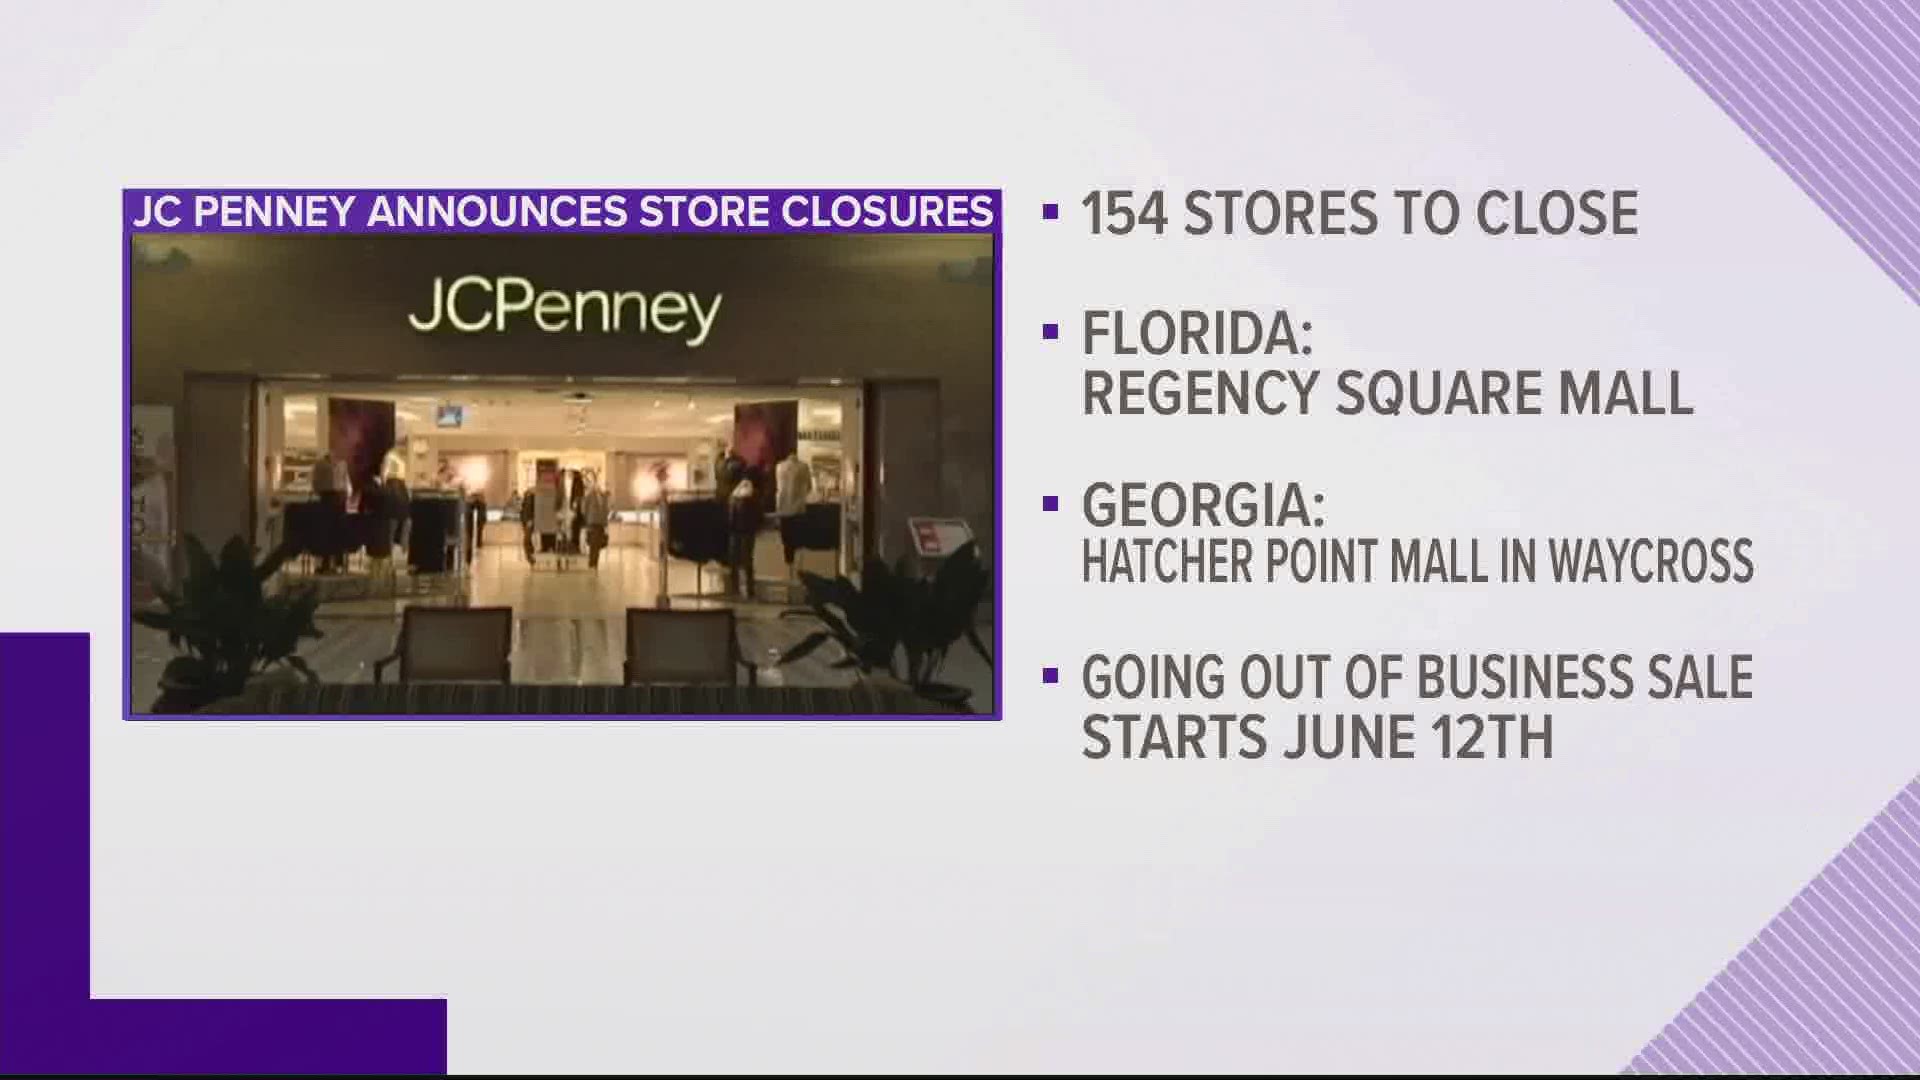 J.C. Penney at Jacksonville’s Regency Square mall is one of 154 stores across the country that the retailer proposes to close under bankruptcy protection.